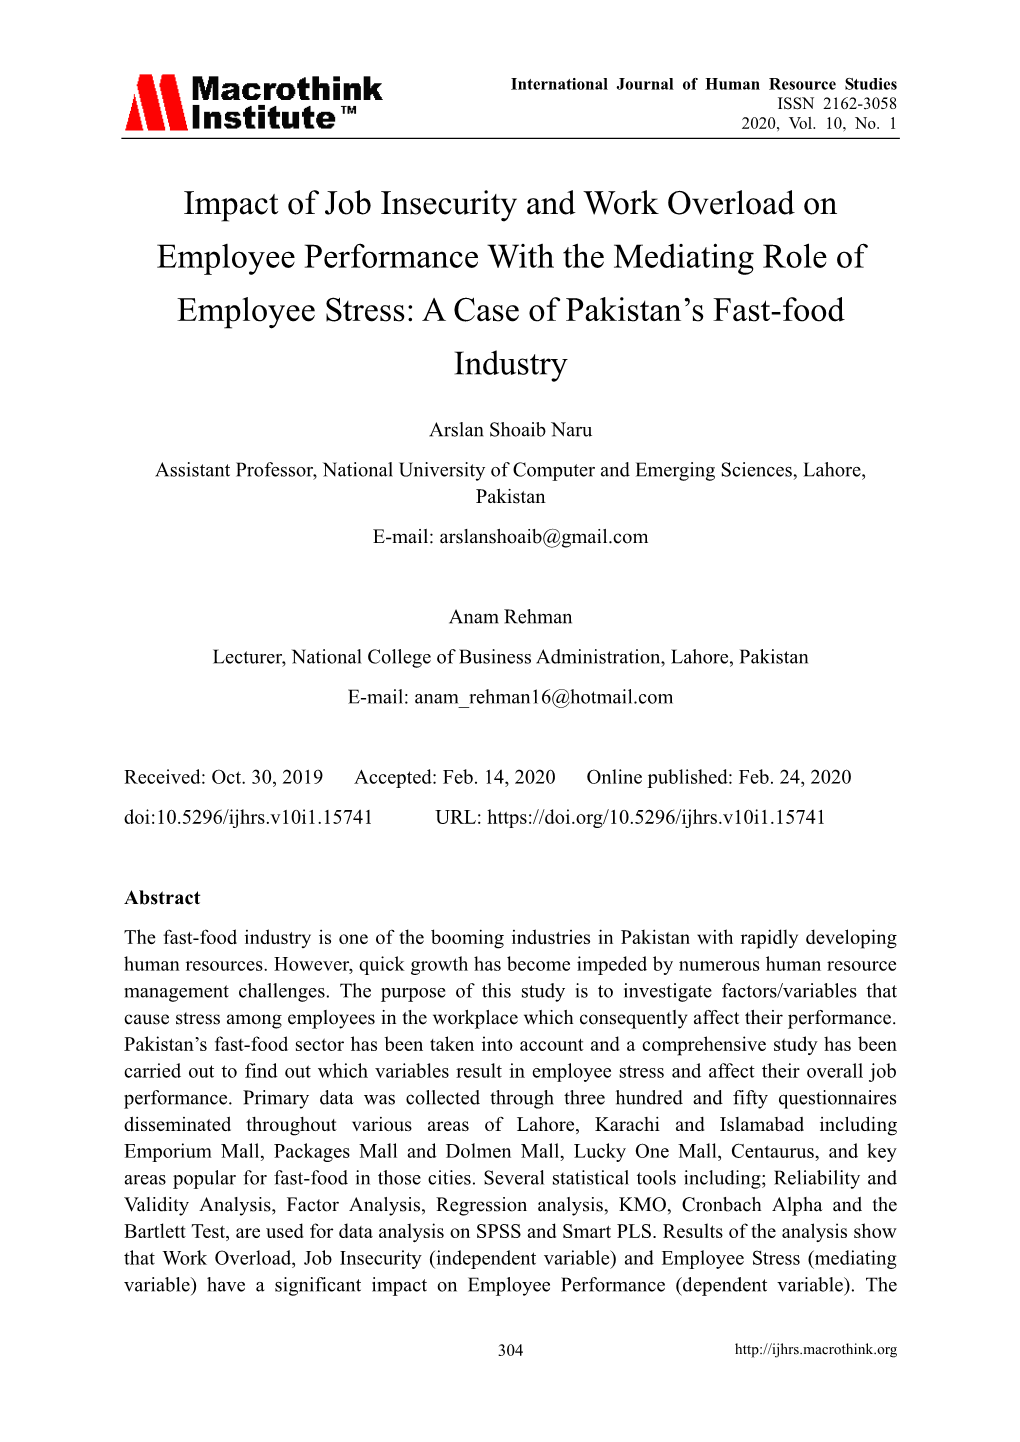 Impact of Job Insecurity and Work Overload on Employee Performance with the Mediating Role of Employee Stress: a Case of Pakistan’S Fast-Food Industry